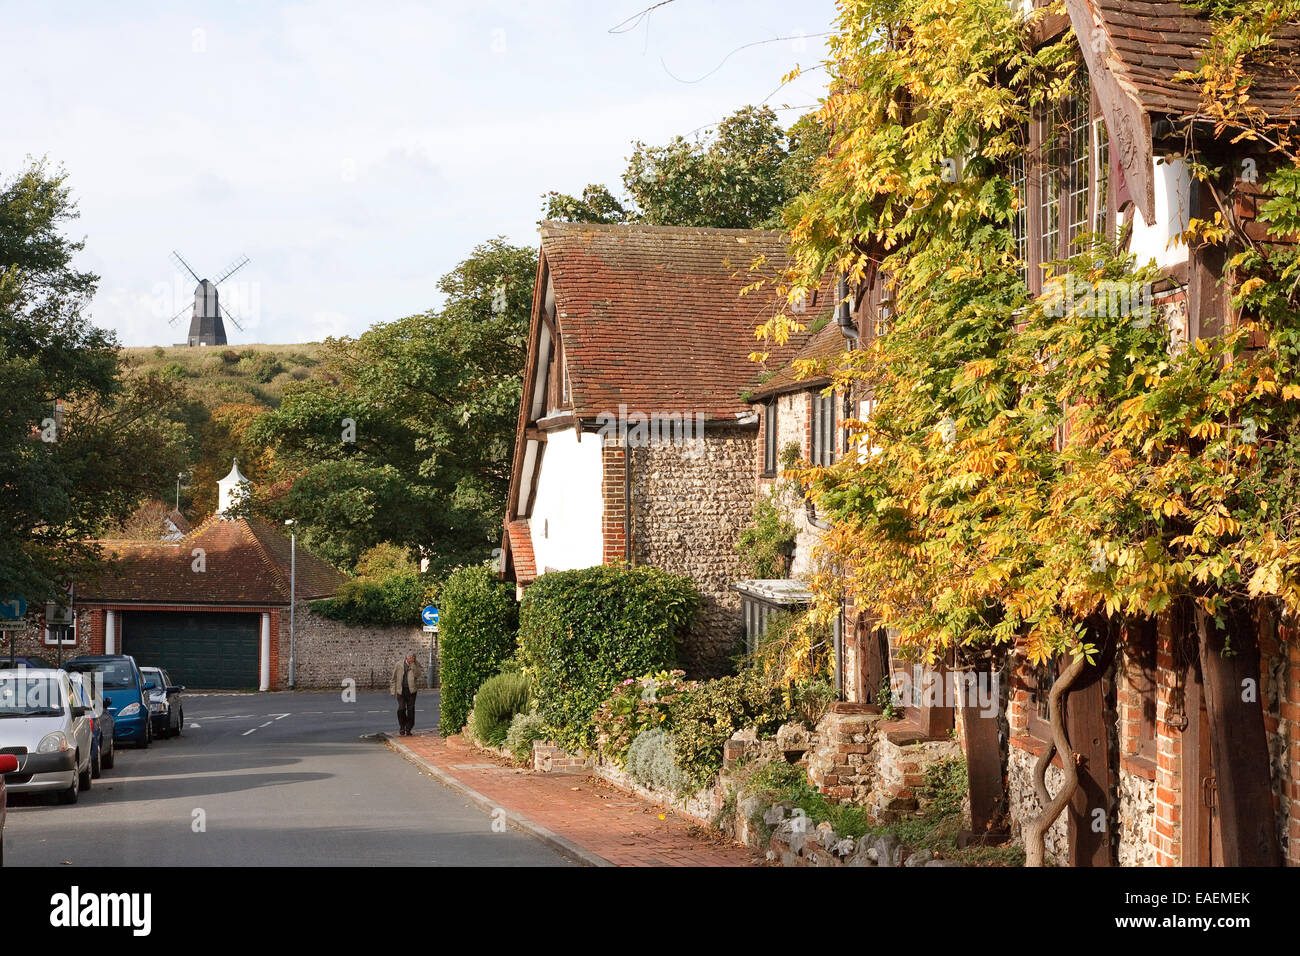 Rottingdean village - its old buildings and windmill, East Sussex. The man in the image happens to have his face covered and is Stock Photo